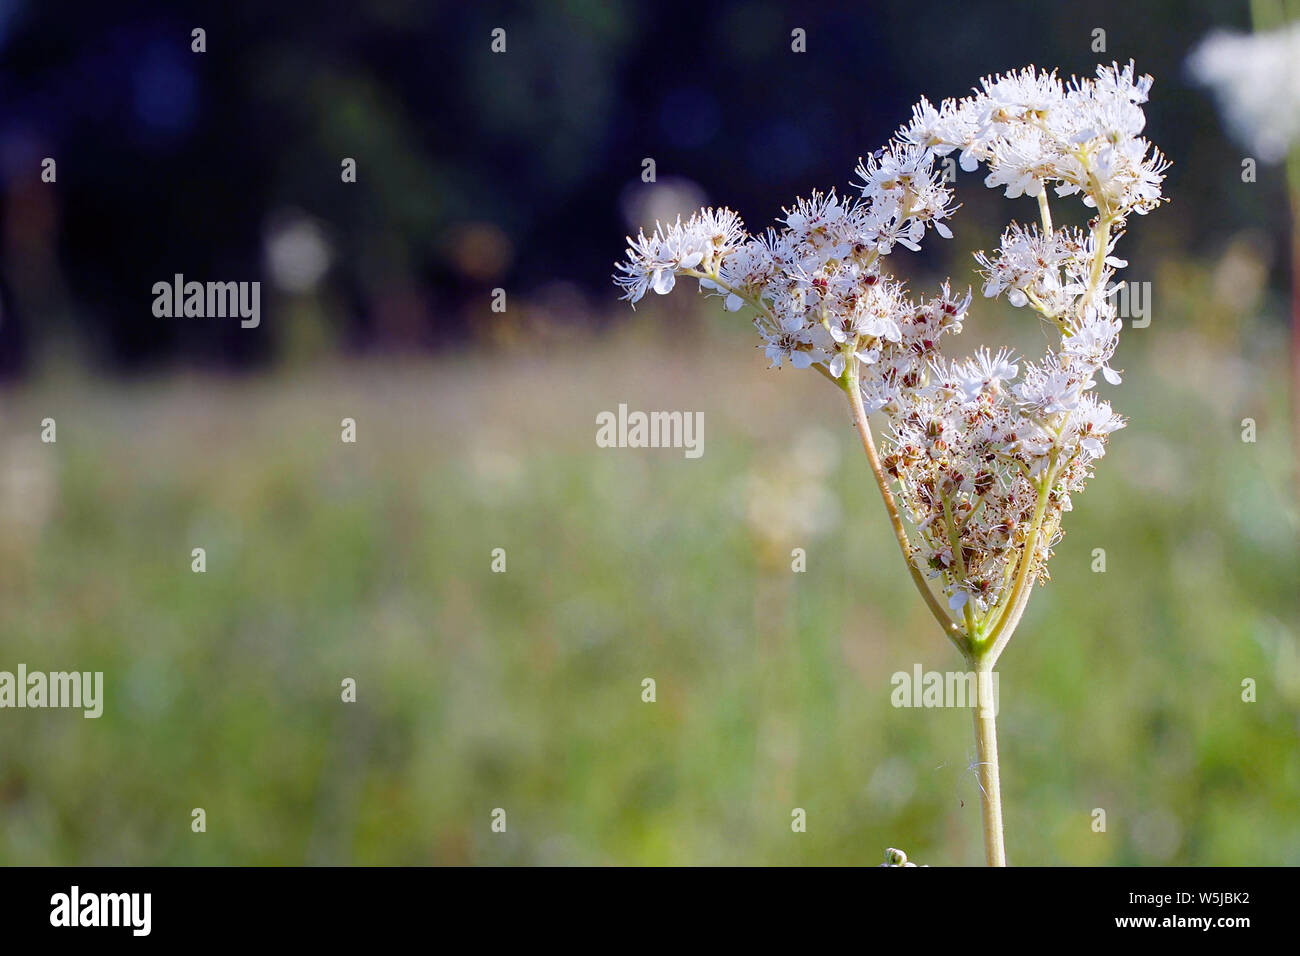 White meadow flower yarrow on natural background Stock Photo